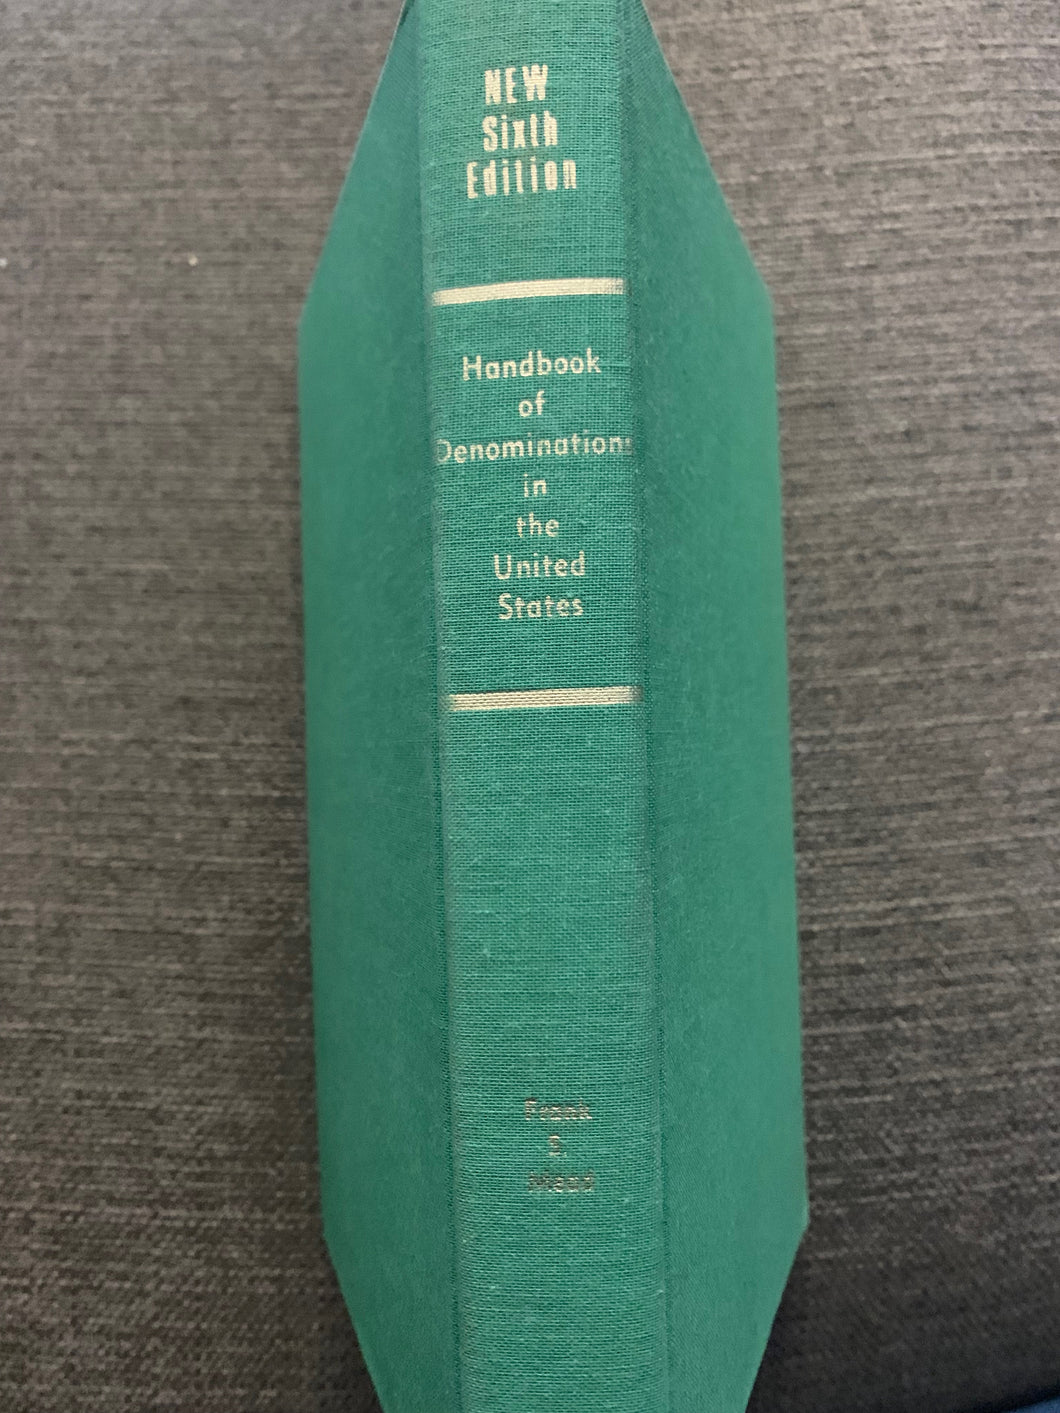 Handbook of Denomination in the United States: Sixth Edition by Frank S. Mead